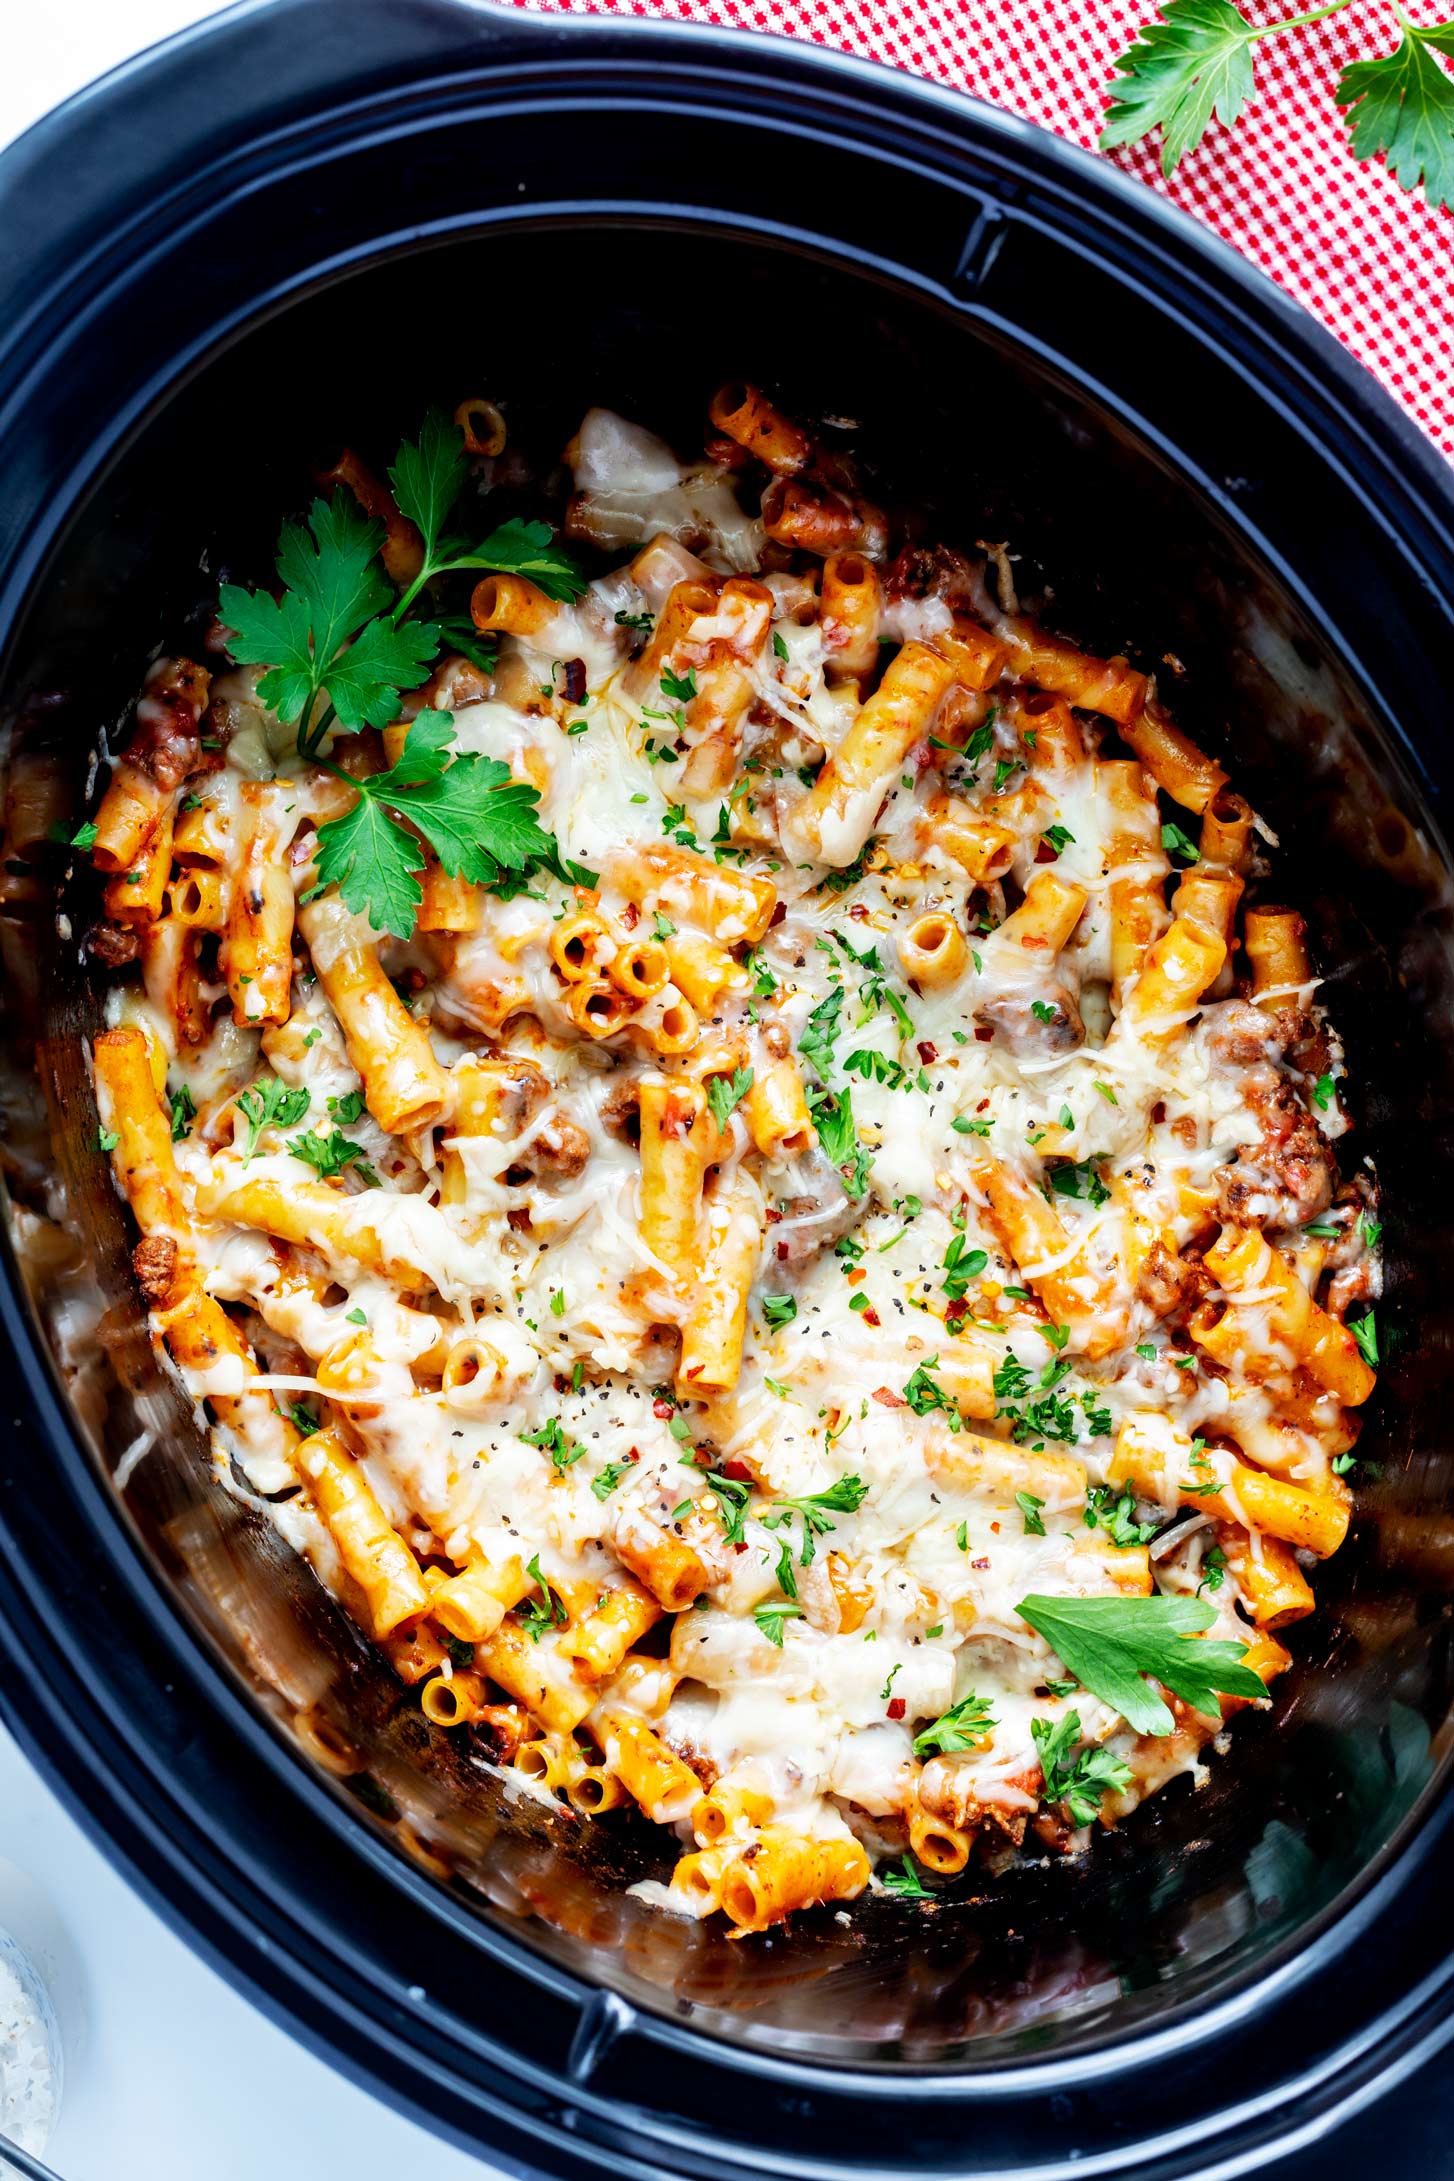 Overhead photo of baked ziti in a crockpot garnished with parsley.